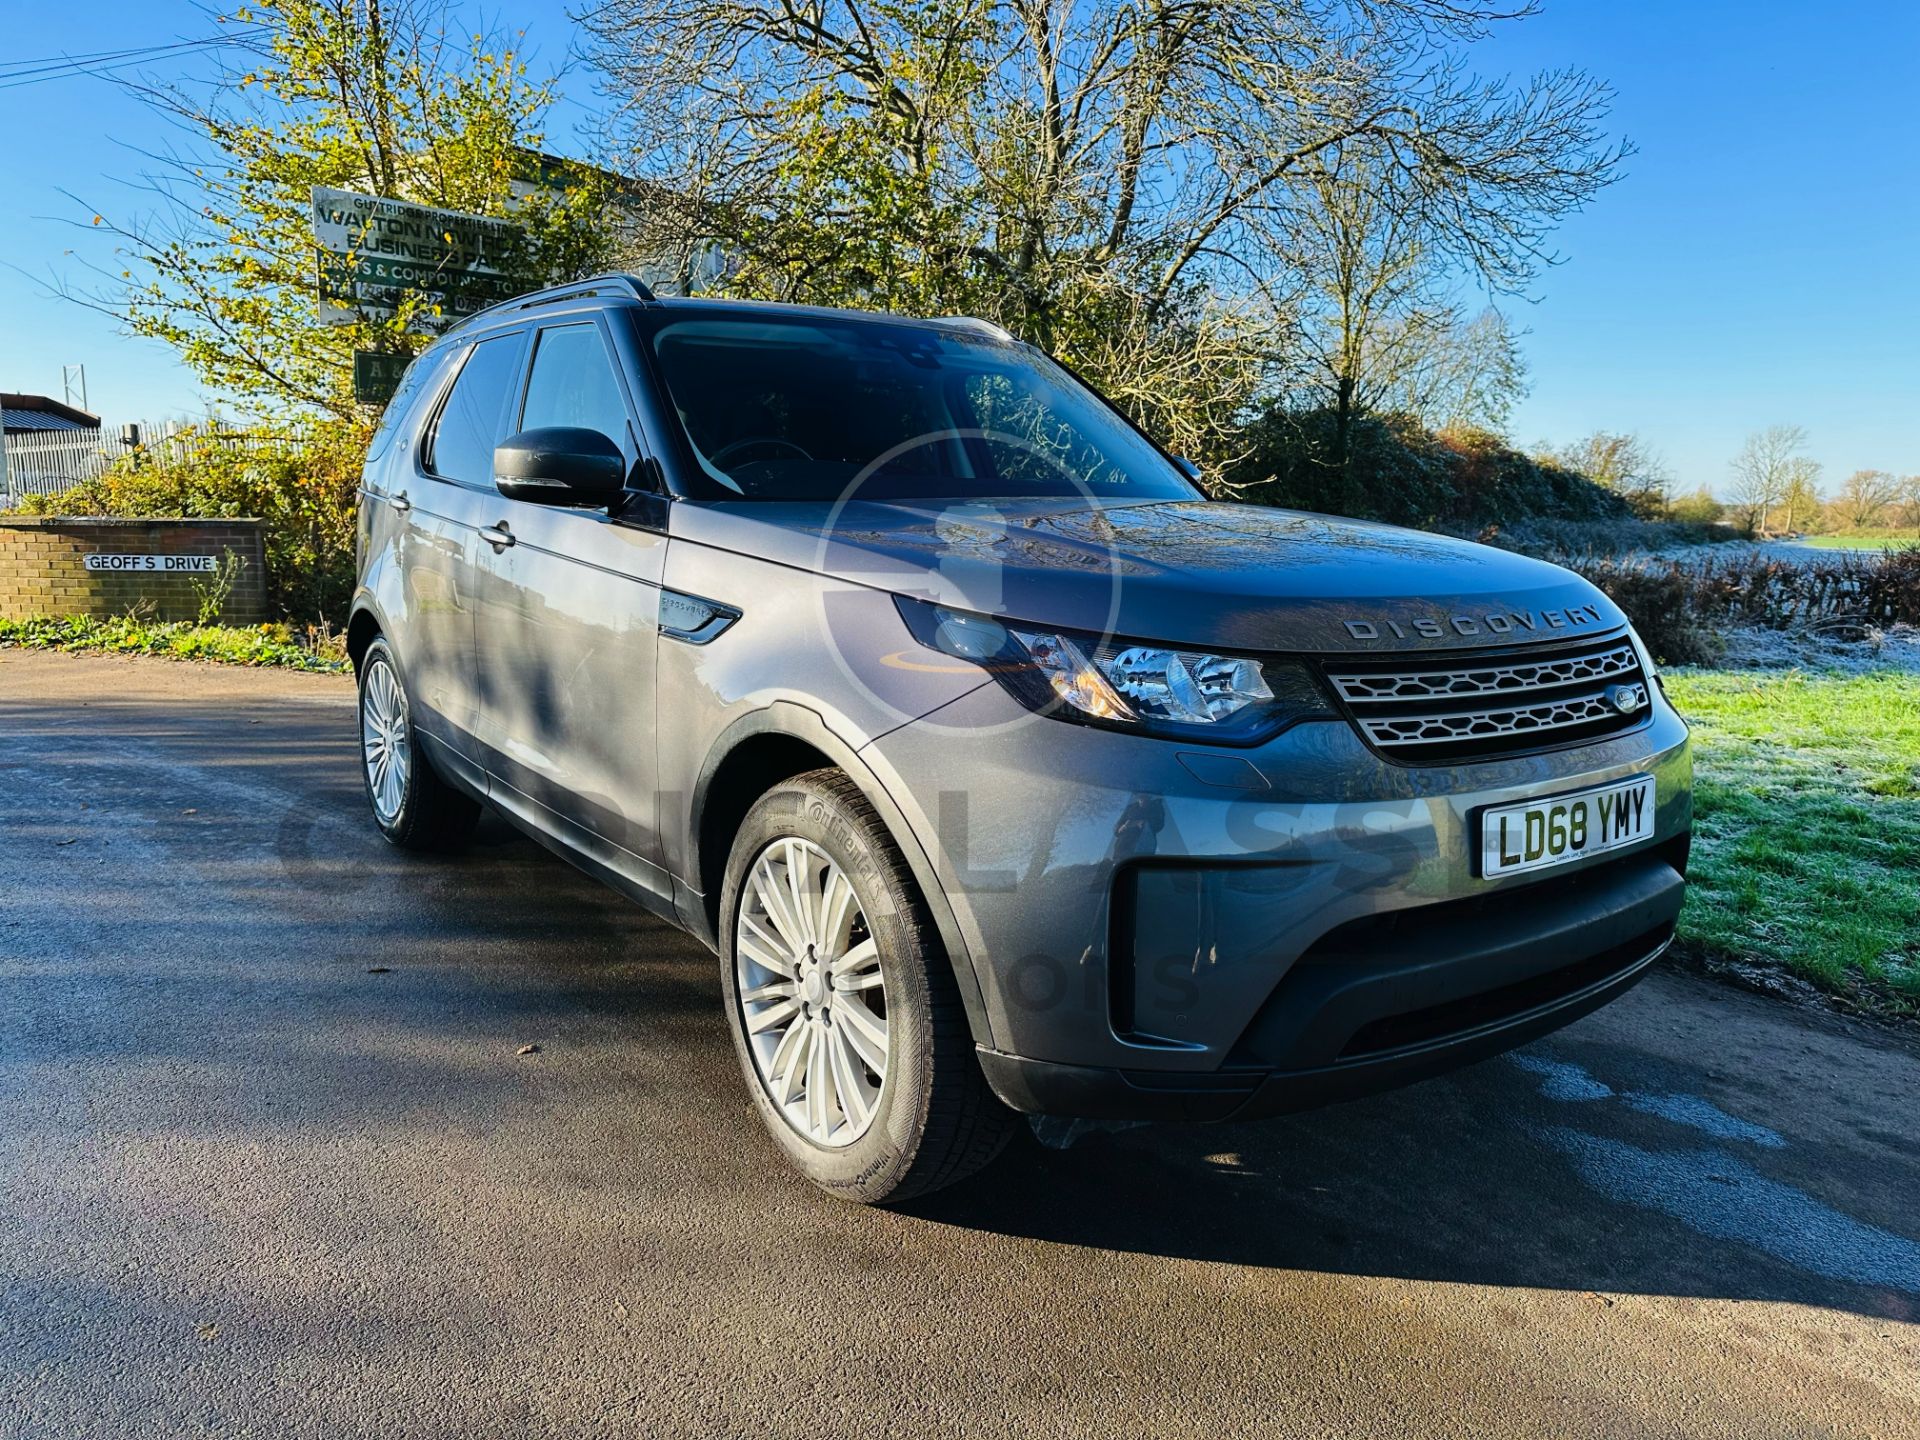 (ON SALE) LAND ROVER DISCOVERY 5 "AUTO DIESEL - 7 SEATER SUV - 2019 MODEL - ONLY 22K MILES FROM NEW - Image 2 of 41